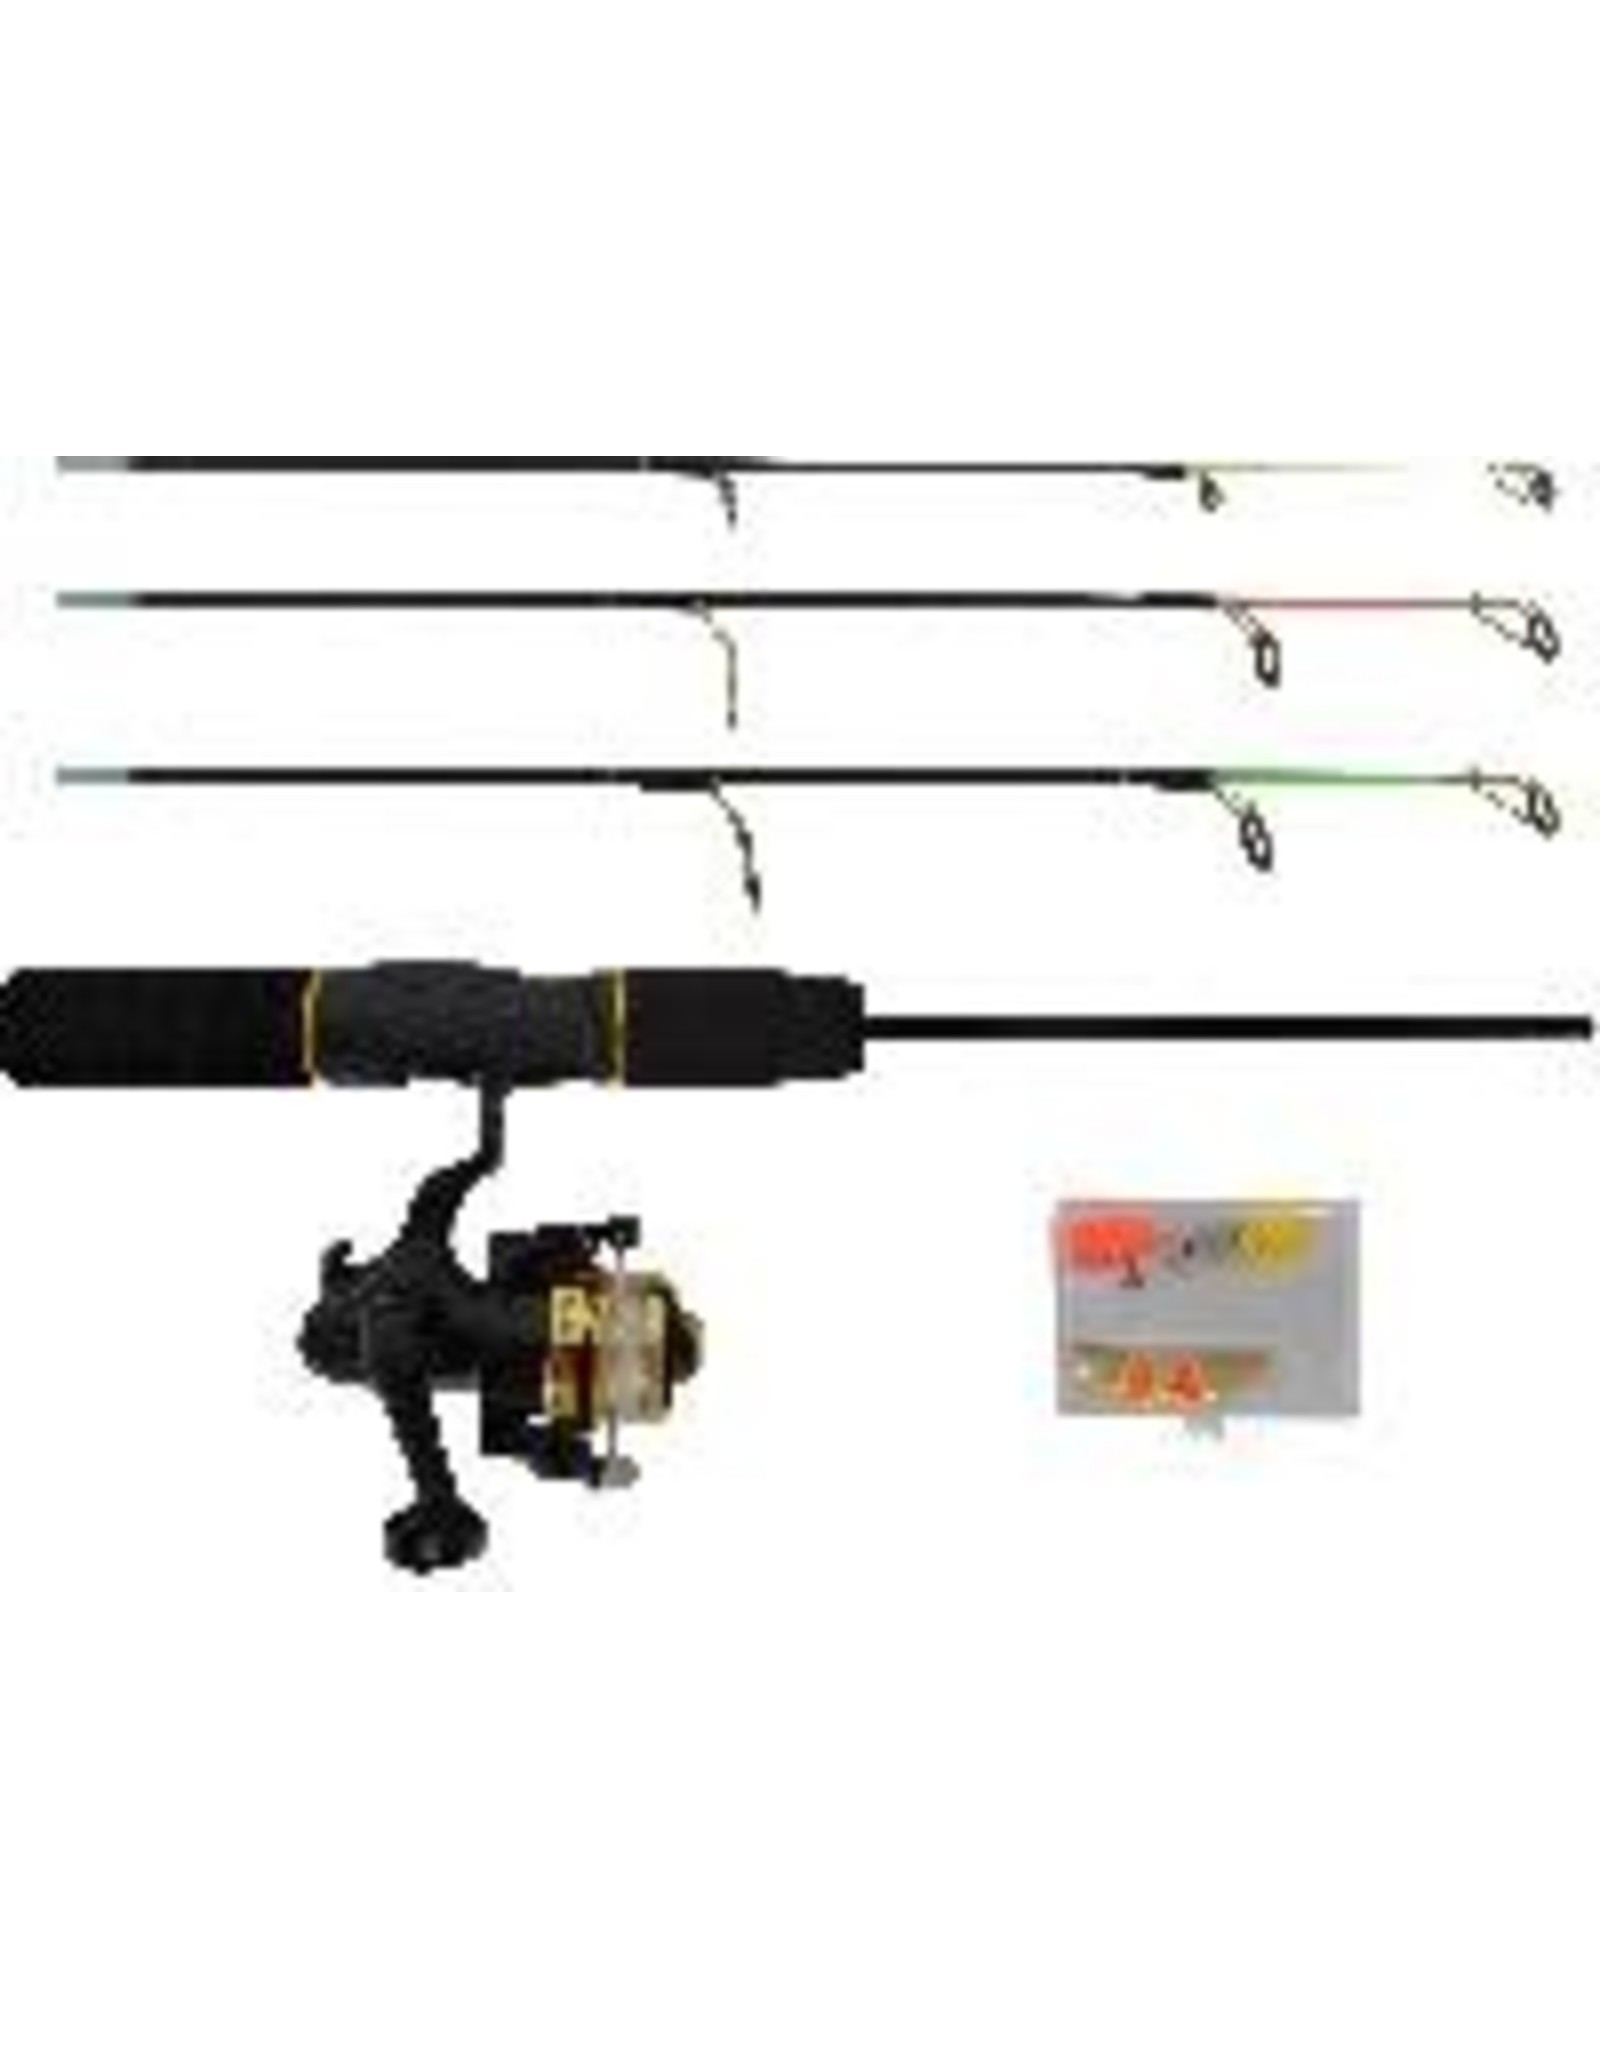 HI TECH HIT 3-IN-1 ICE ROD COMBO SYSTEM - Prime Time Hunting